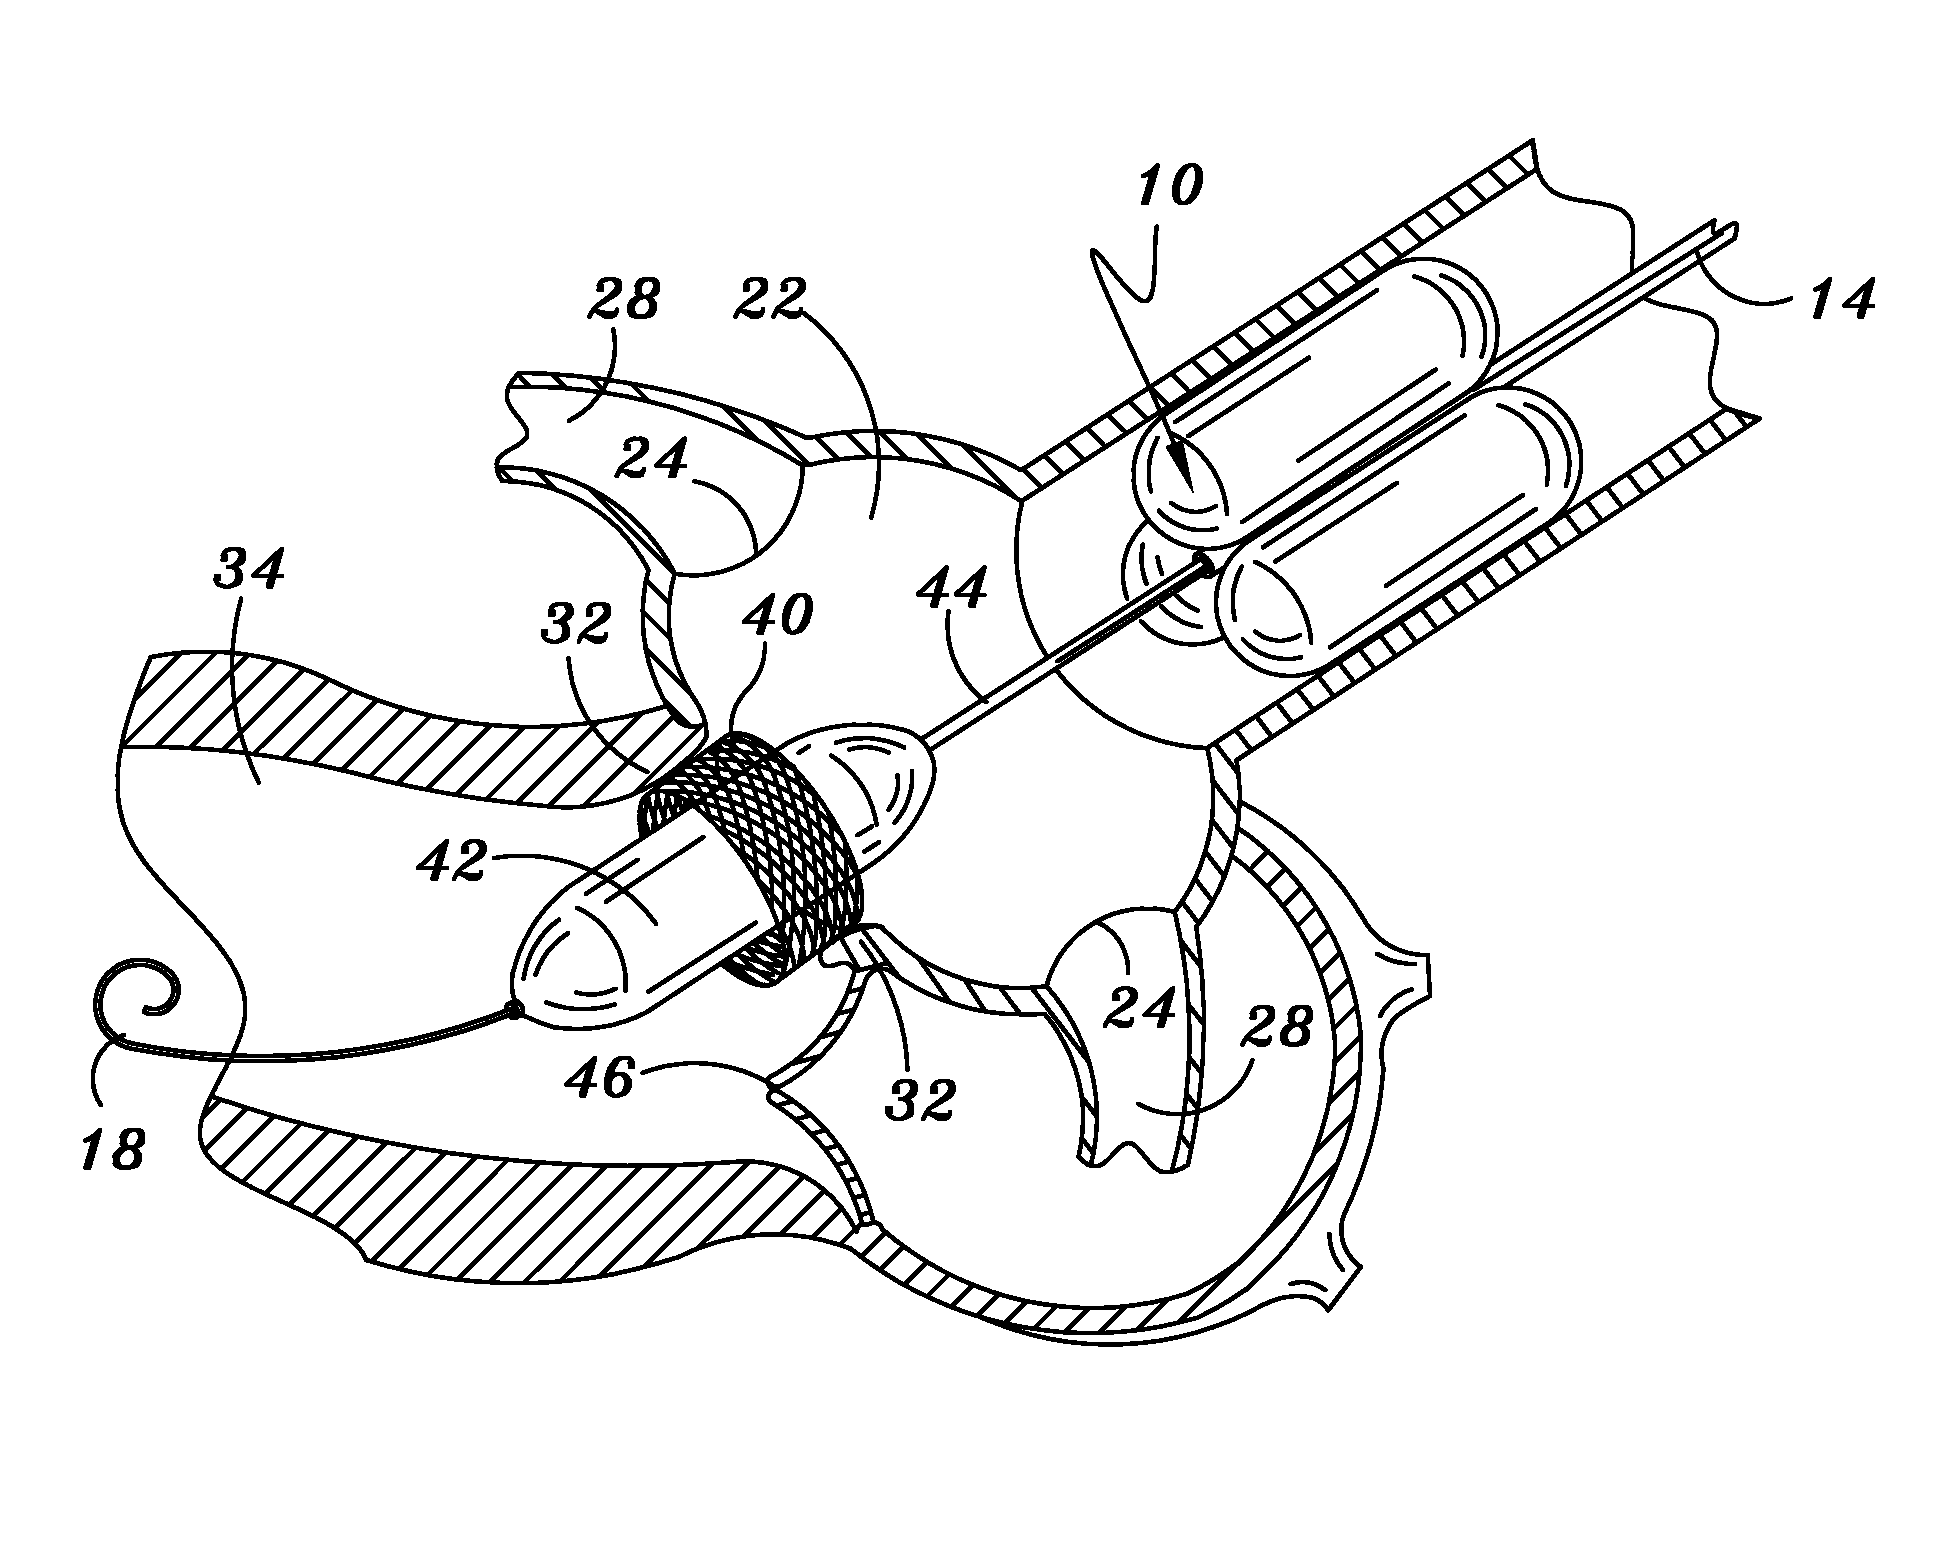 Methods and apparatus for percutaneous aortic valve replacement